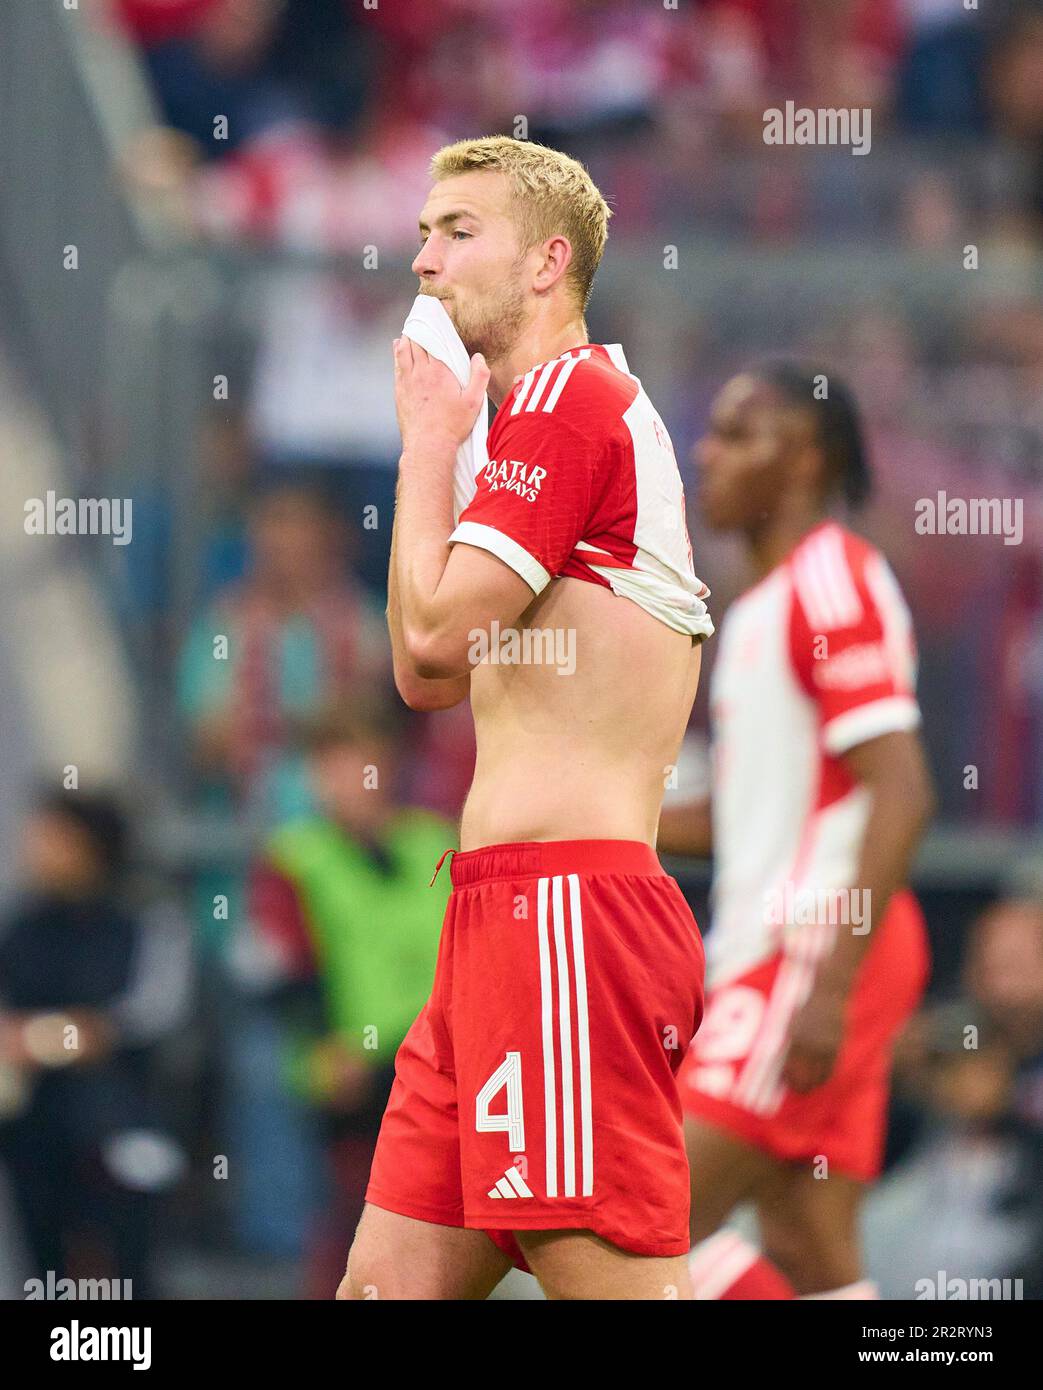 Matthijs de Ligt, FCB 4 sad in the match FC BAYERN MUENCHEN - RB LEIPZIG 1.German Football League on May 20, 2023 in Munich, Germany. Season 2022/2023, matchday 33, 1.Bundesliga, FCB, München, 33.Spieltag. © Peter Schatz / Alamy Live News    - DFL REGULATIONS PROHIBIT ANY USE OF PHOTOGRAPHS as IMAGE SEQUENCES and/or QUASI-VIDEO - Stock Photo